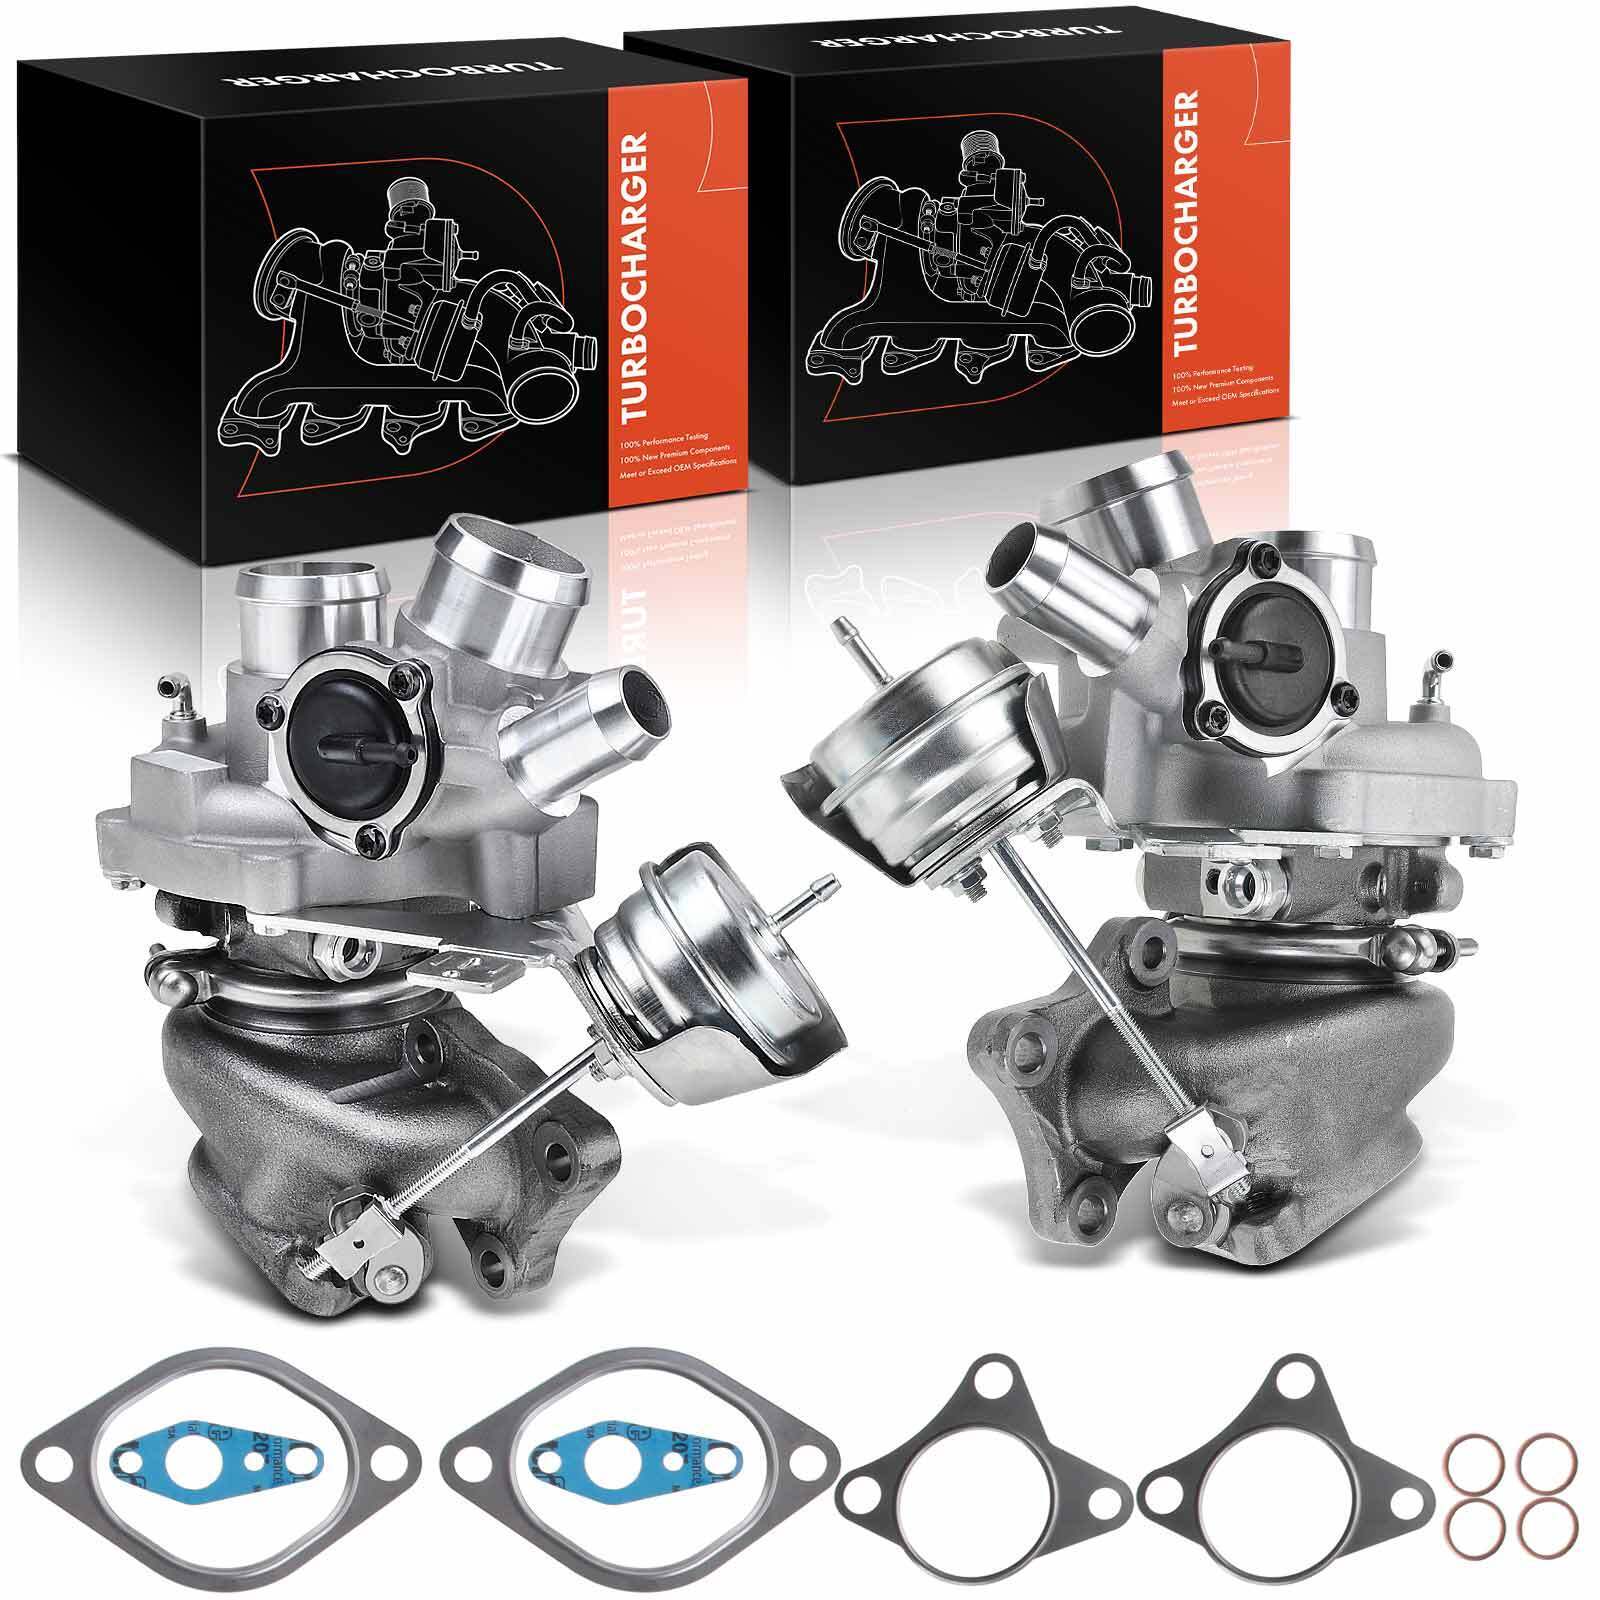 Pair Turbo Turbocharger w/ Gasket For Ford F150 Truck 2011-2012 3.5L V6 Ecoboost